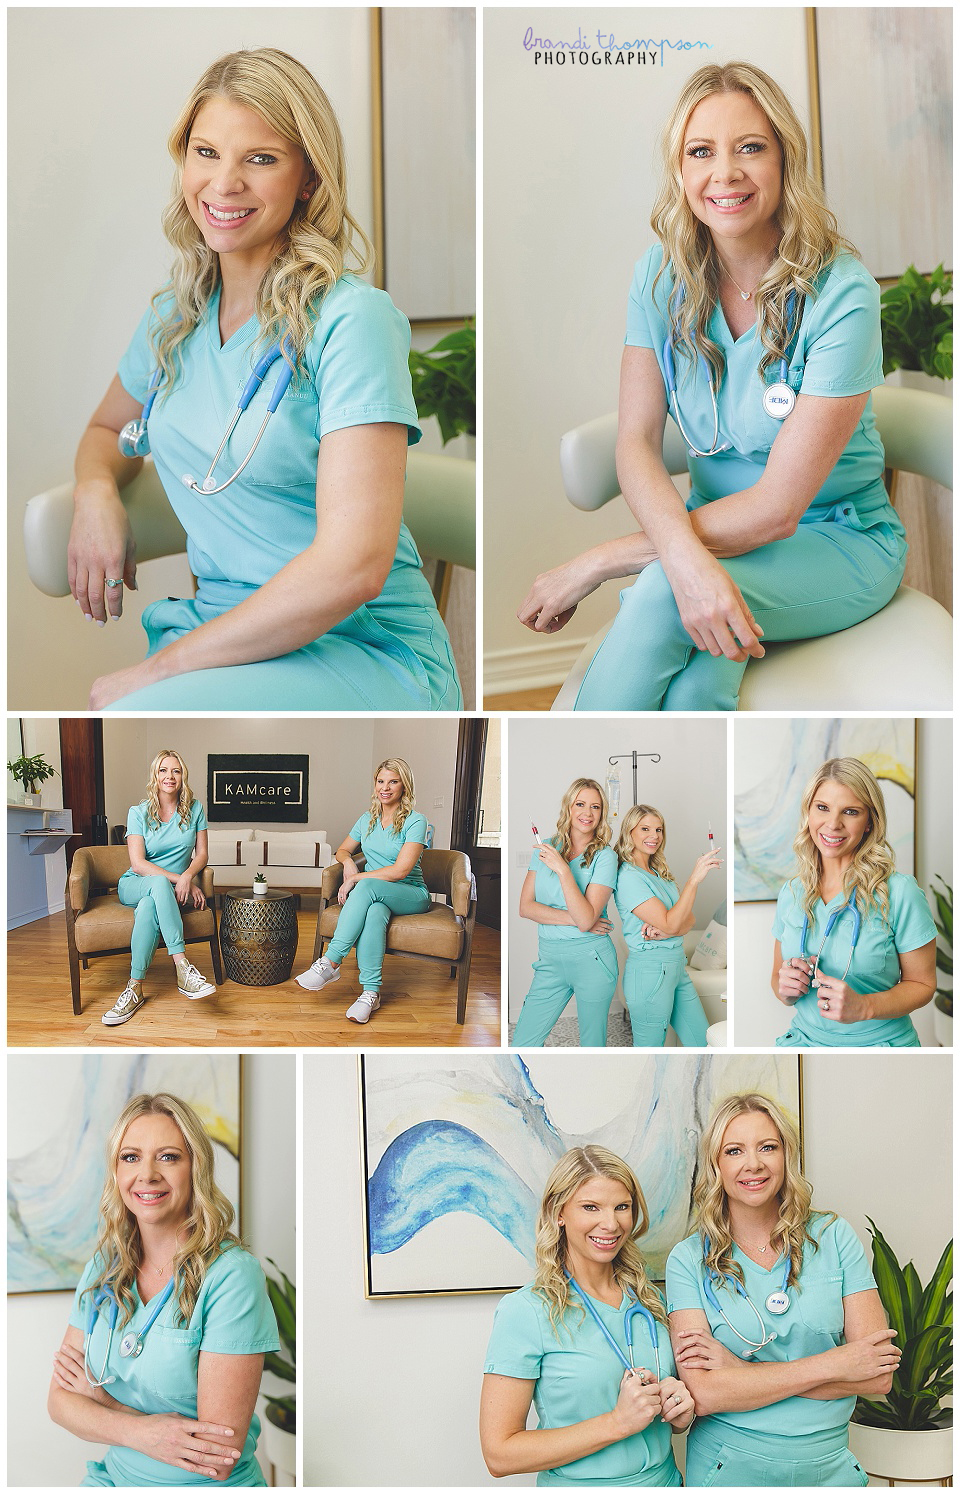 headshots of two white women with blond hair in teal scrubs in a collage of photos, both individual and together